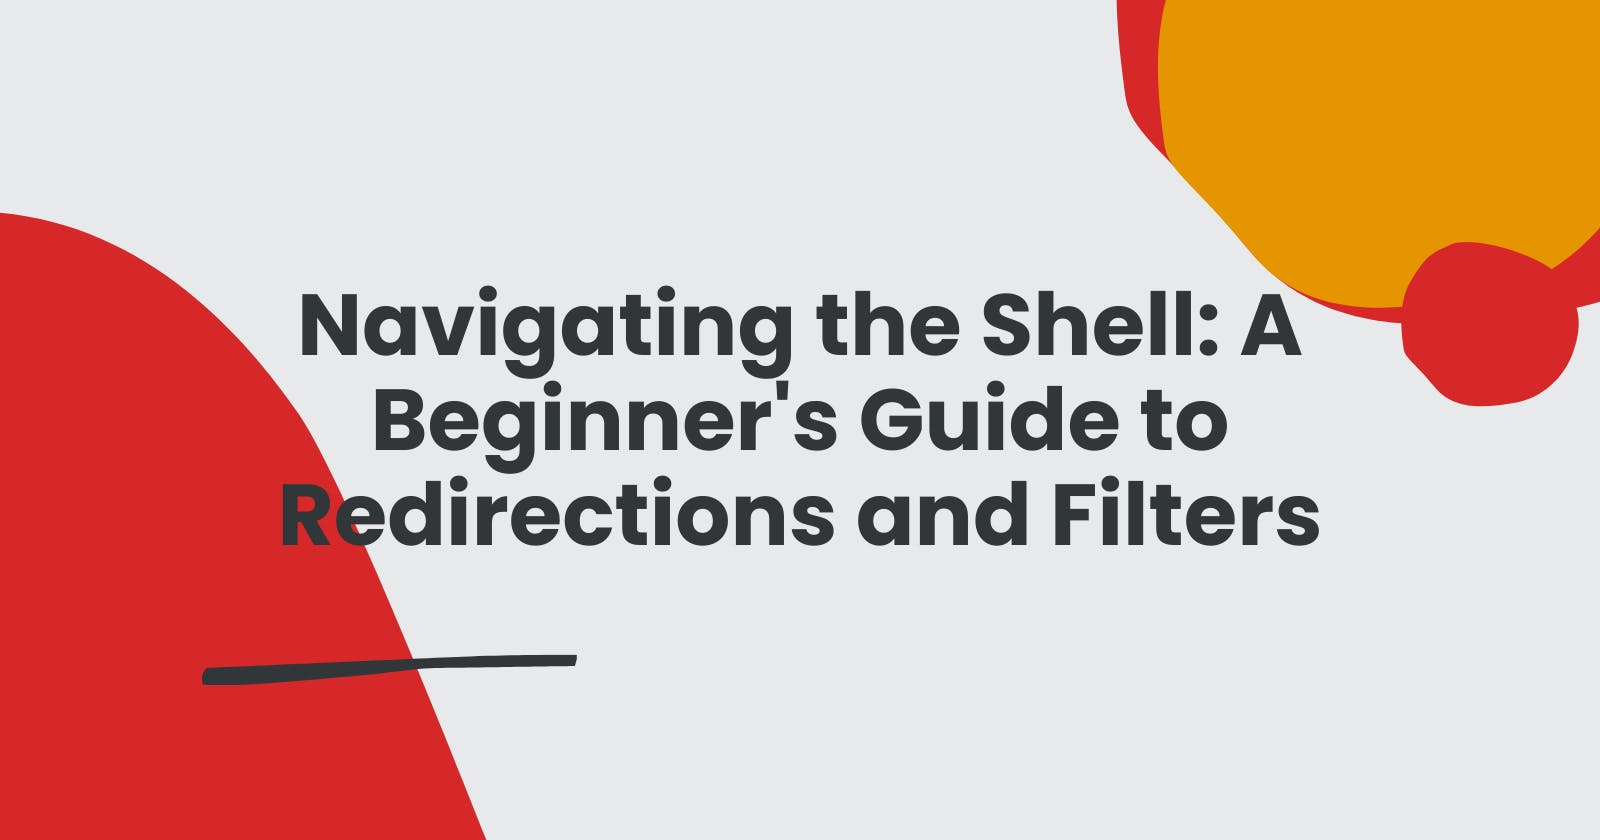 Navigating the Shell: A Beginner's Guide to Redirections and Filters